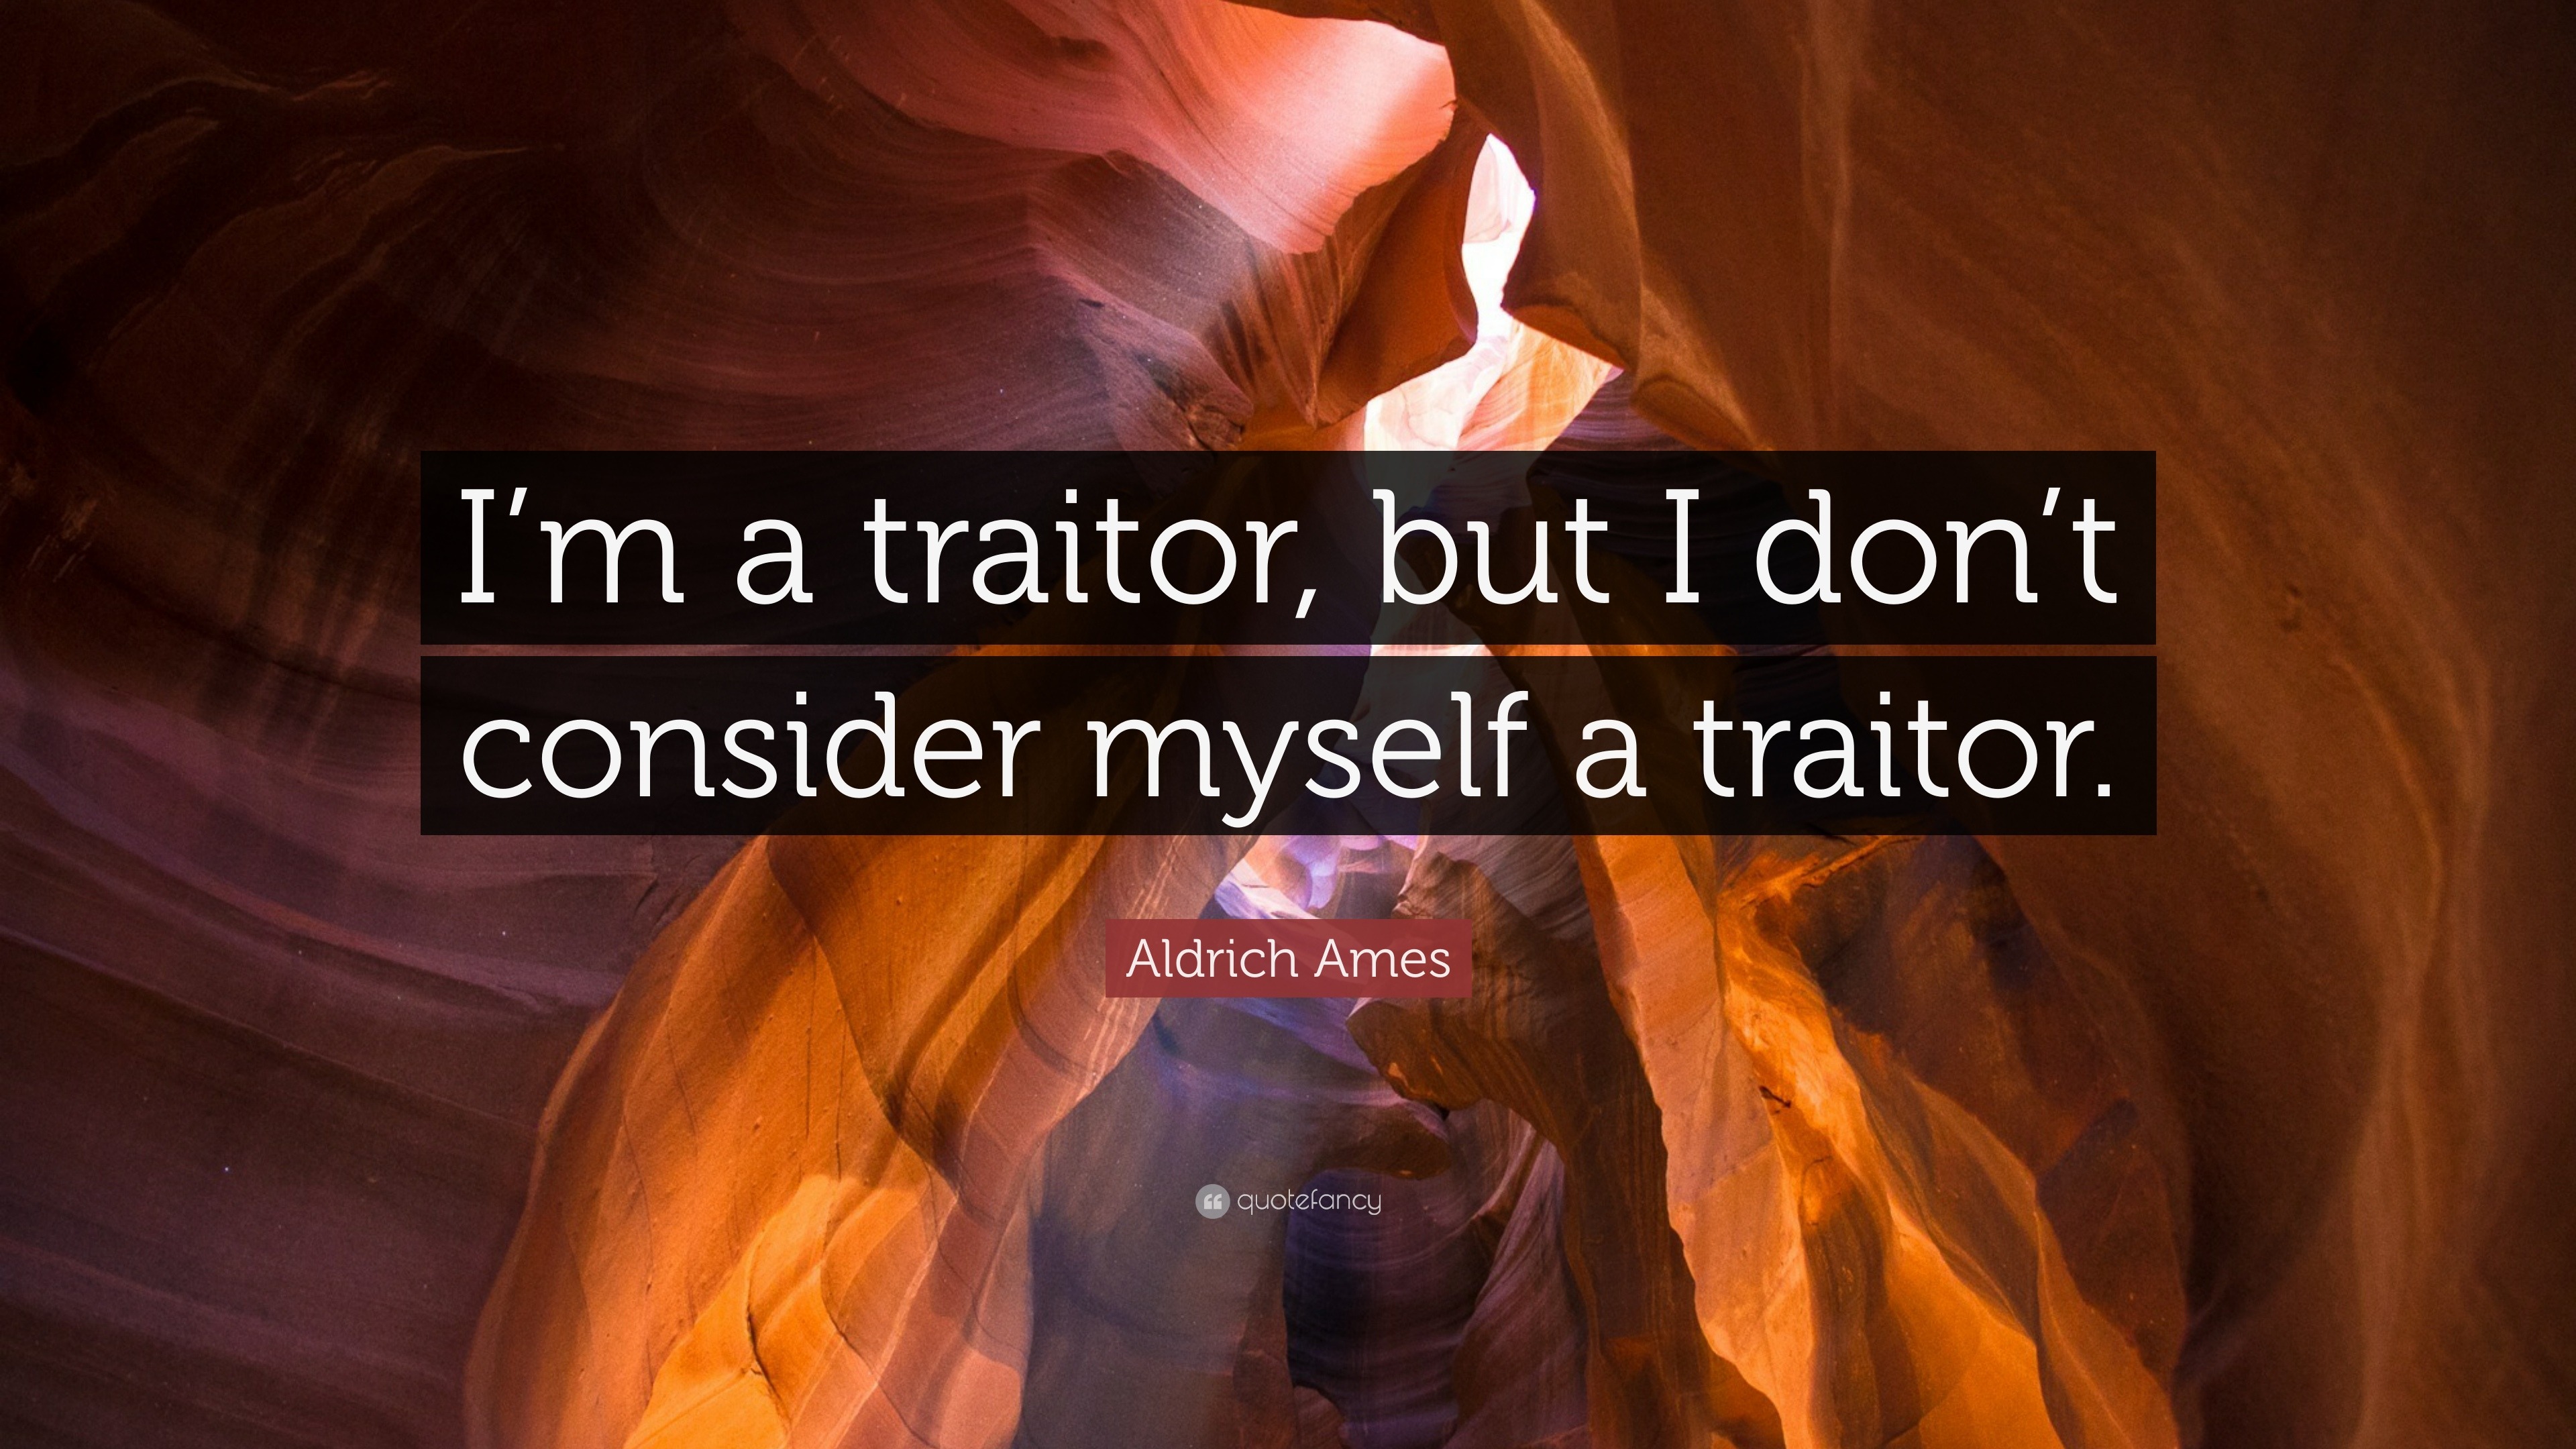 Traitor  meaning of Traitor 